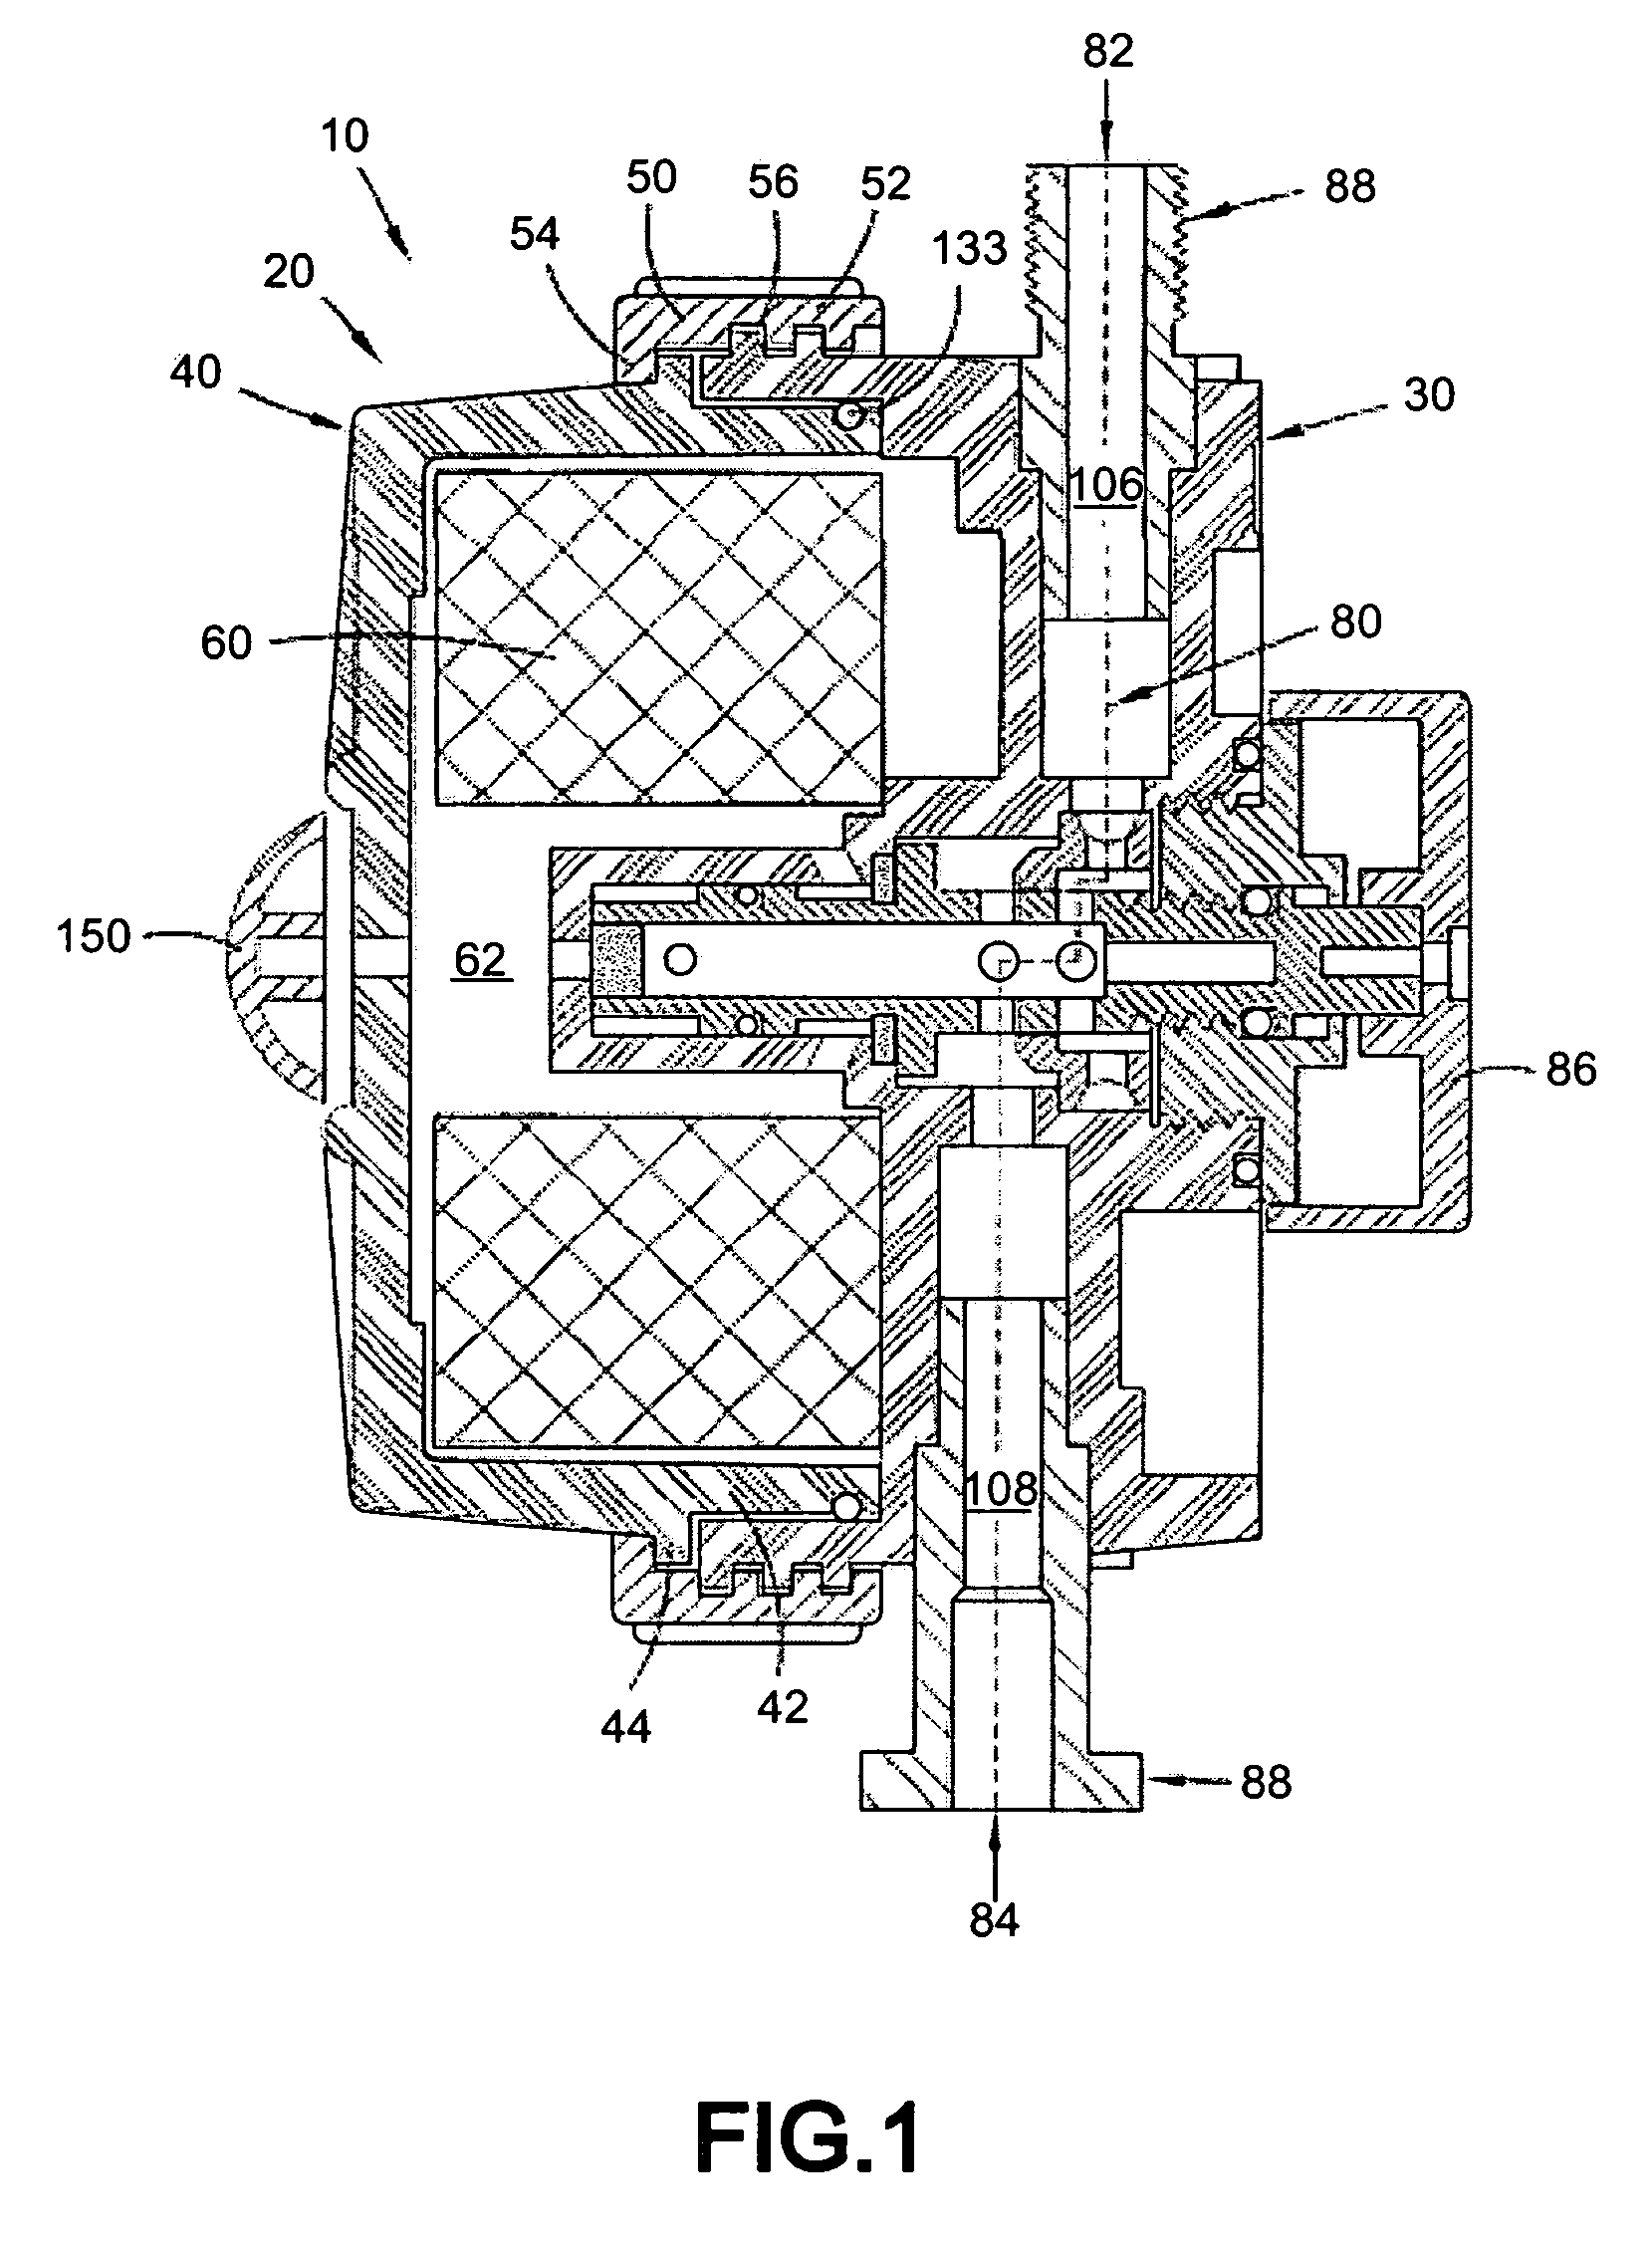 In-line fluid treatment device and system